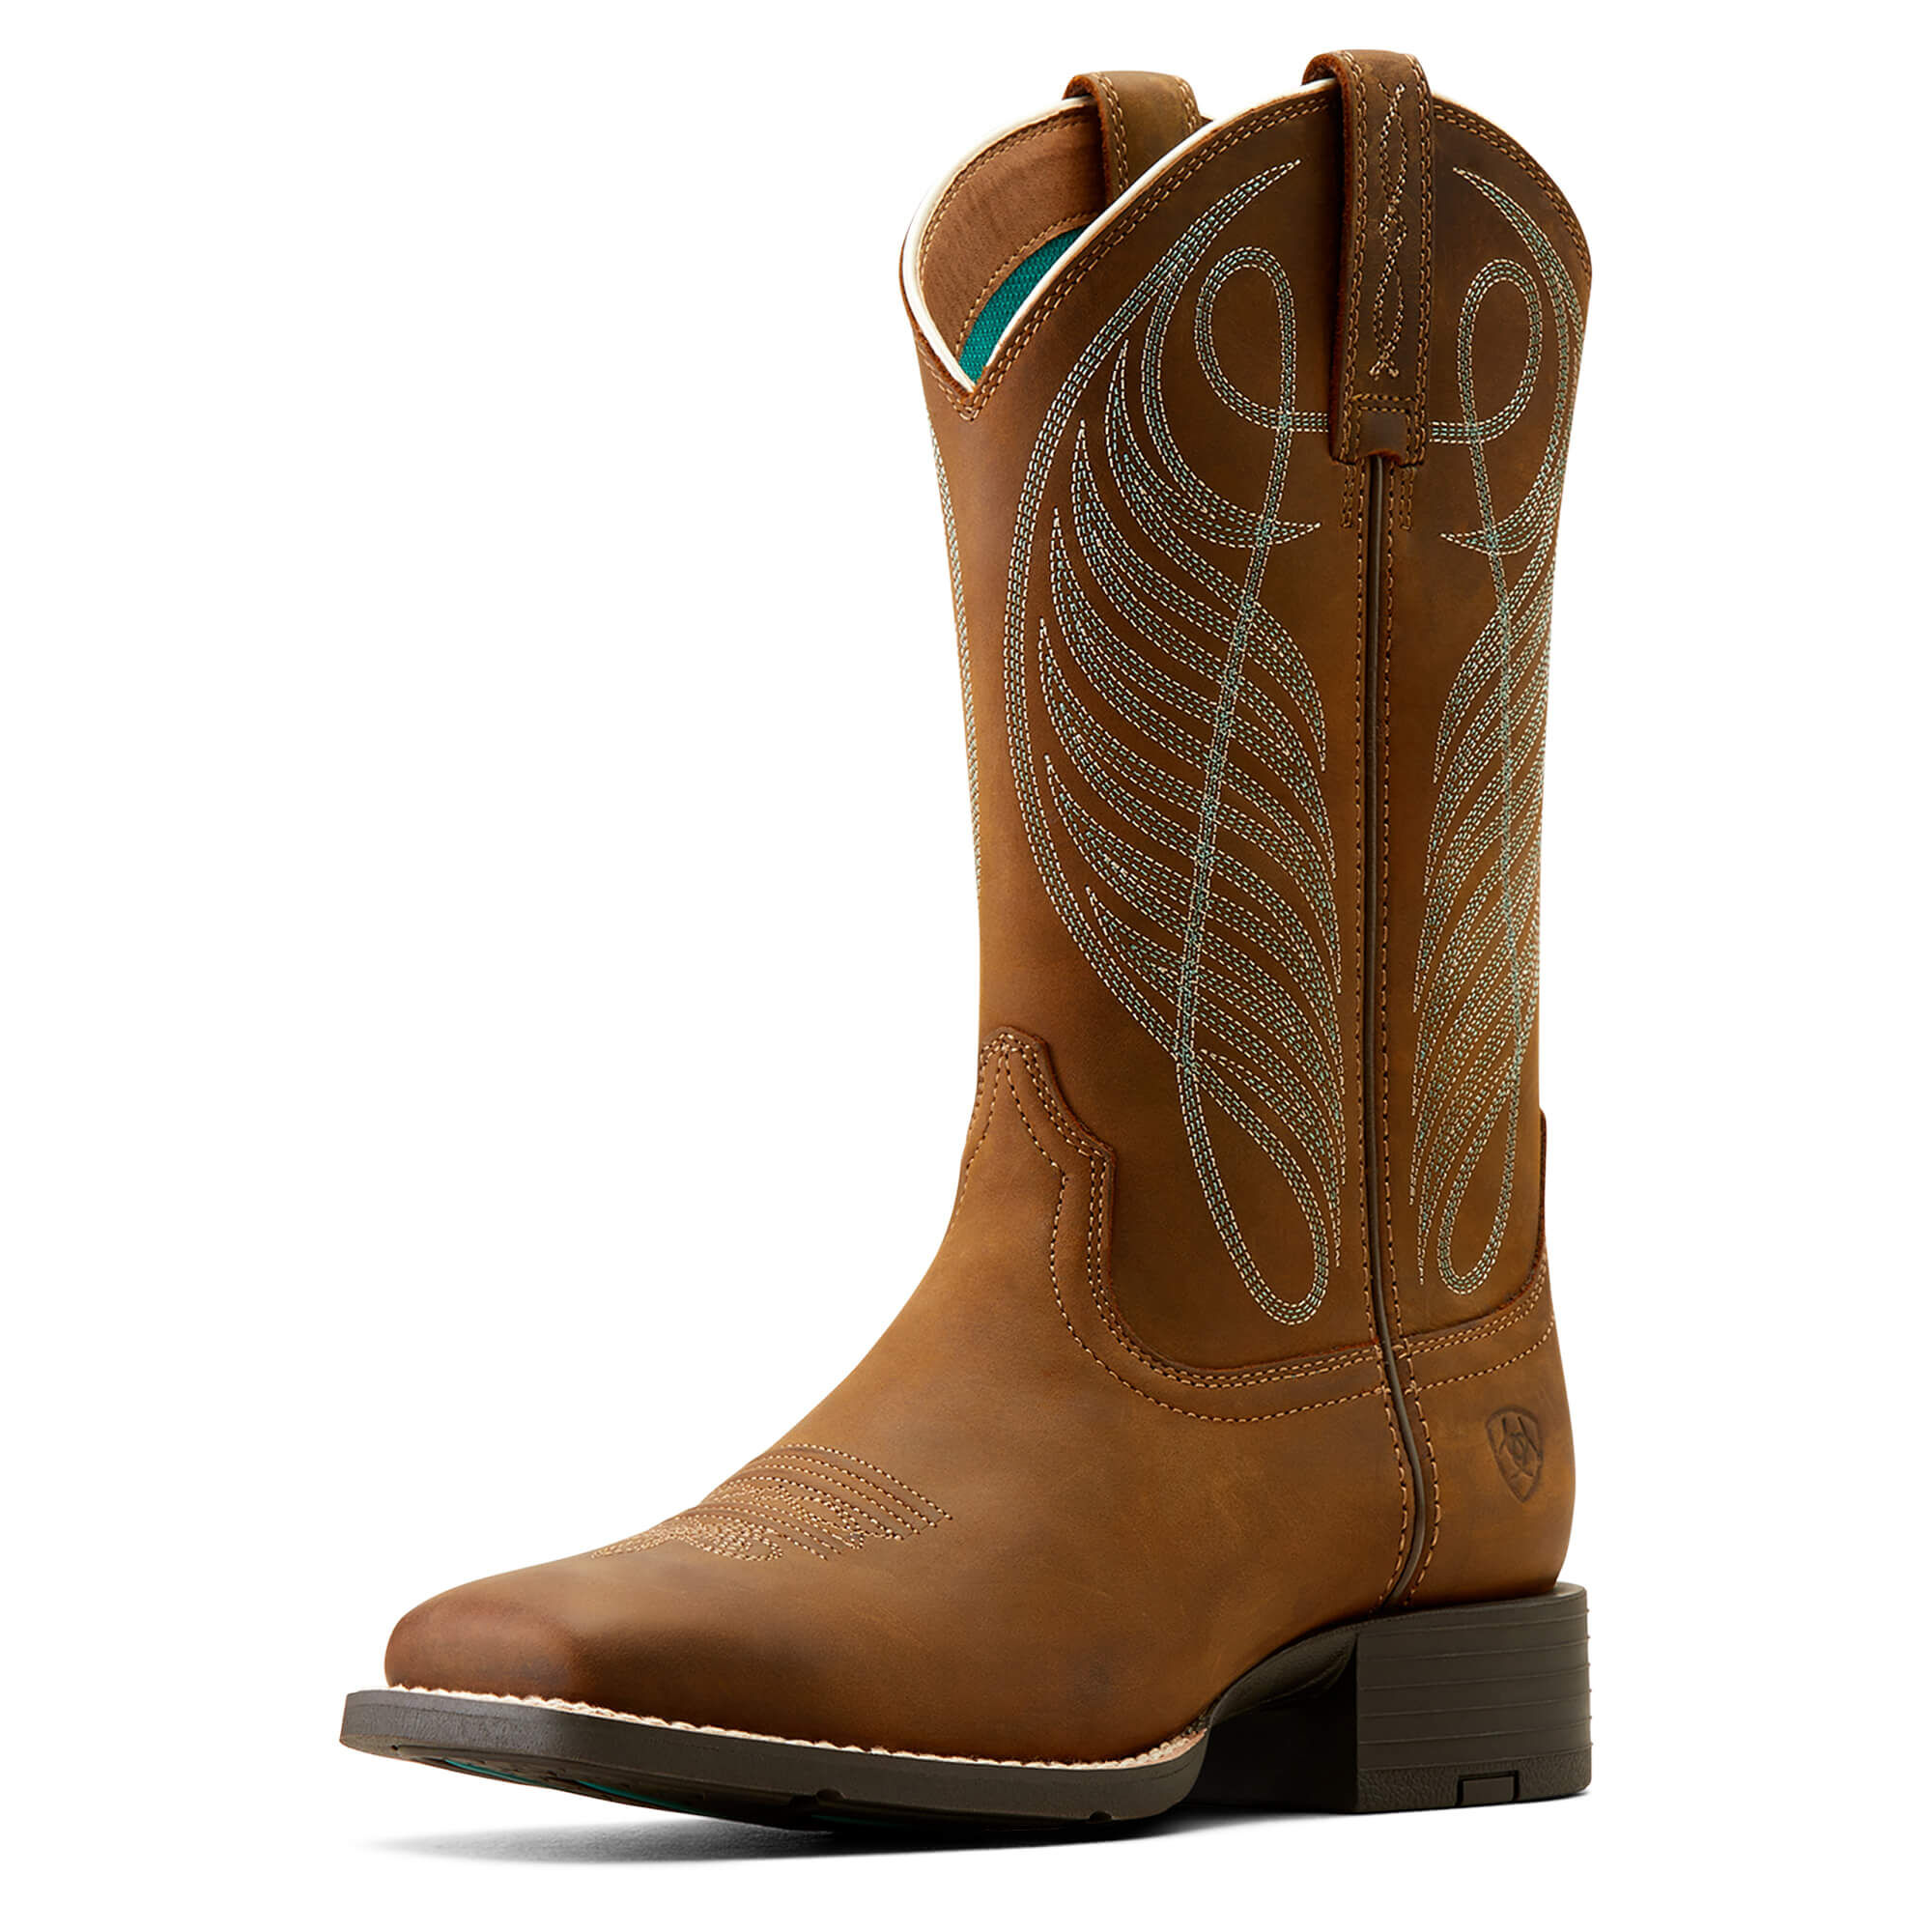 Buy > curved cowboy boots > in stock